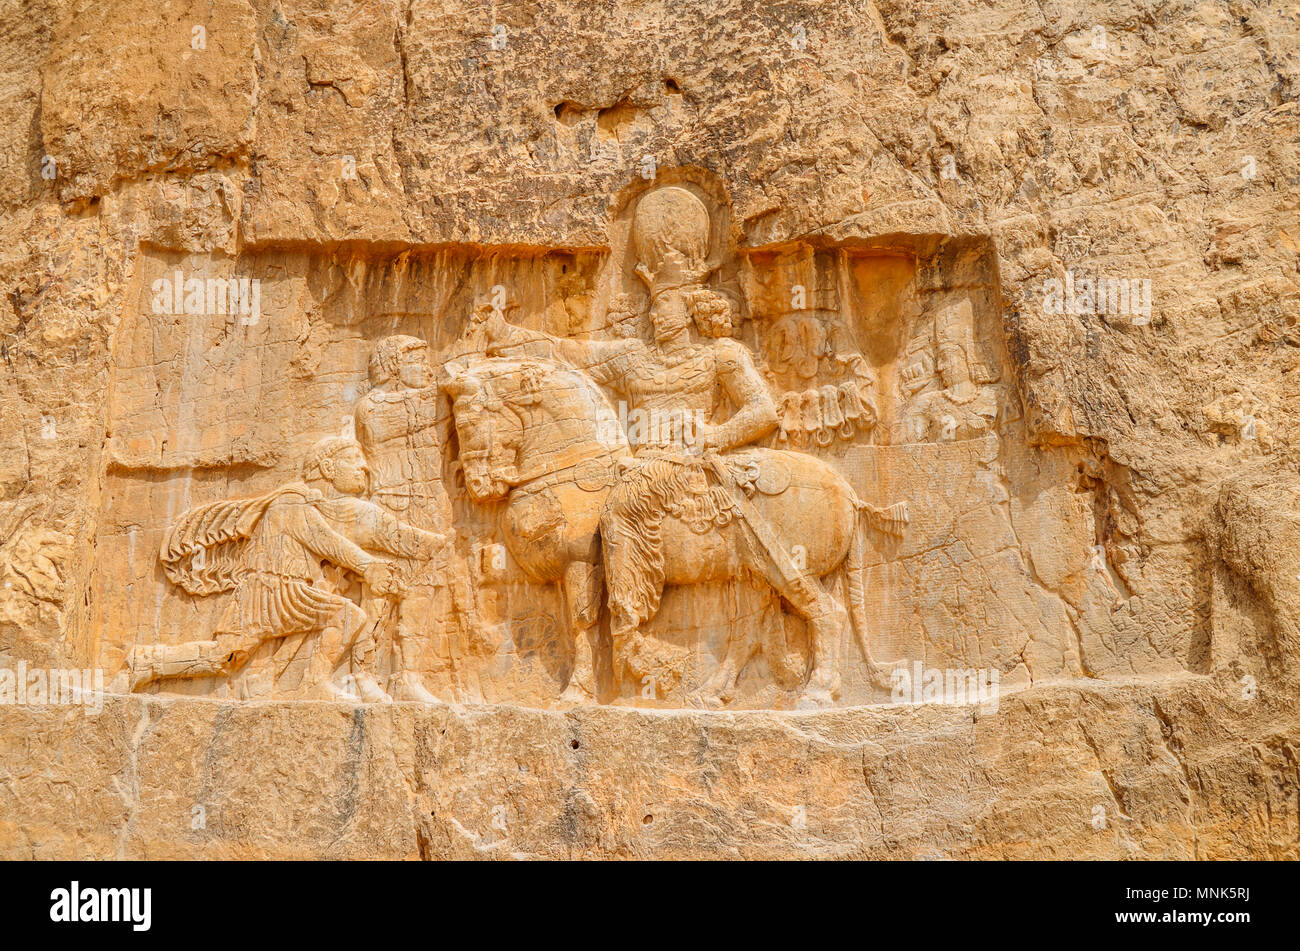 The ancient tombs of Achaemenid dynasty Kings of Persia are carved in rocky cliff in Naqsh-e Rustam, Iran. Stock Photo